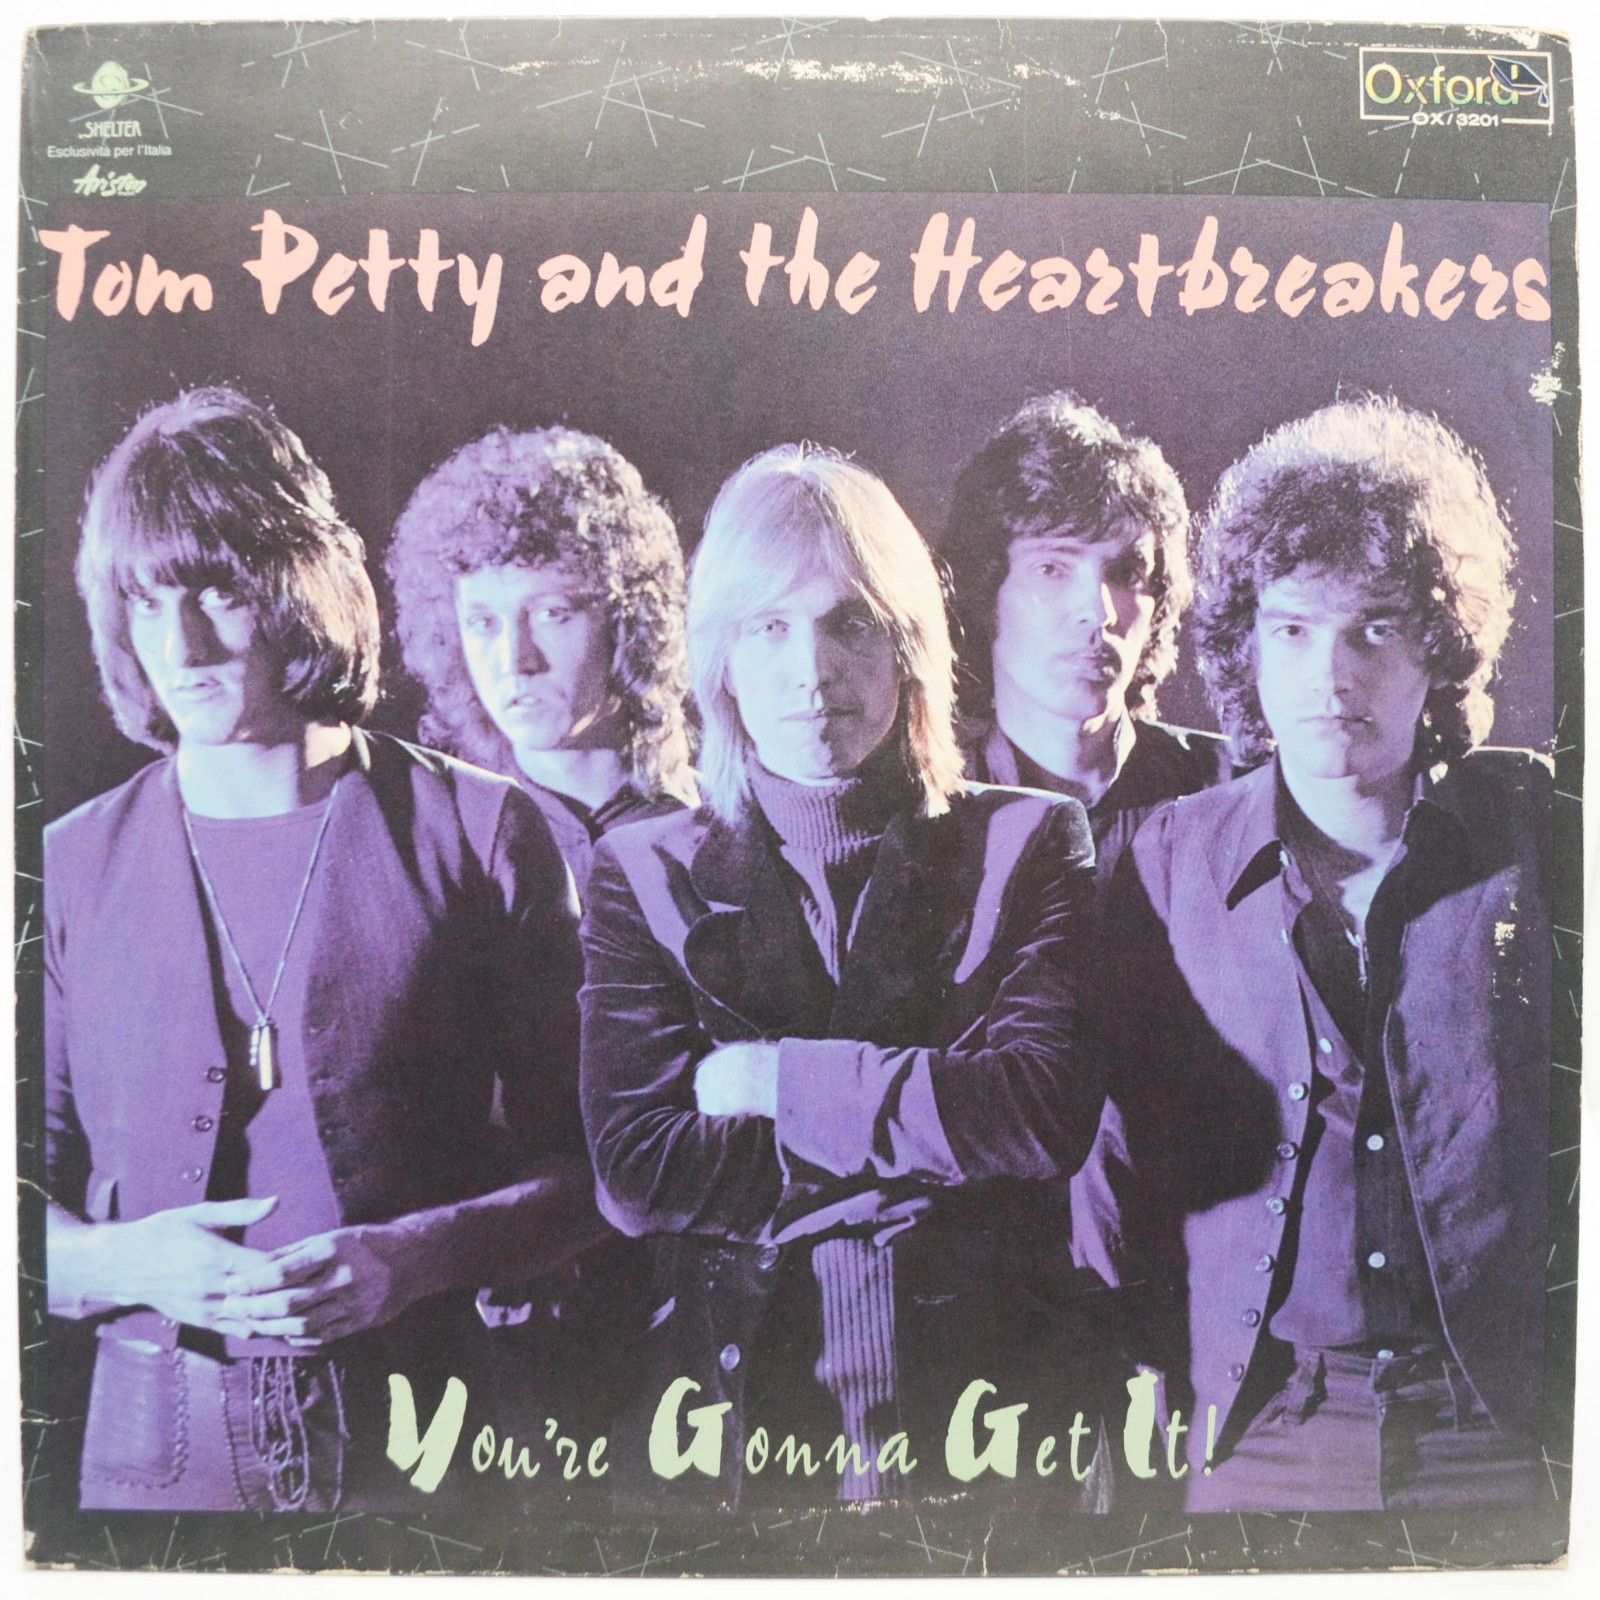 Tom Petty And The Heartbreakers — You're Gonna Get It!, 1981